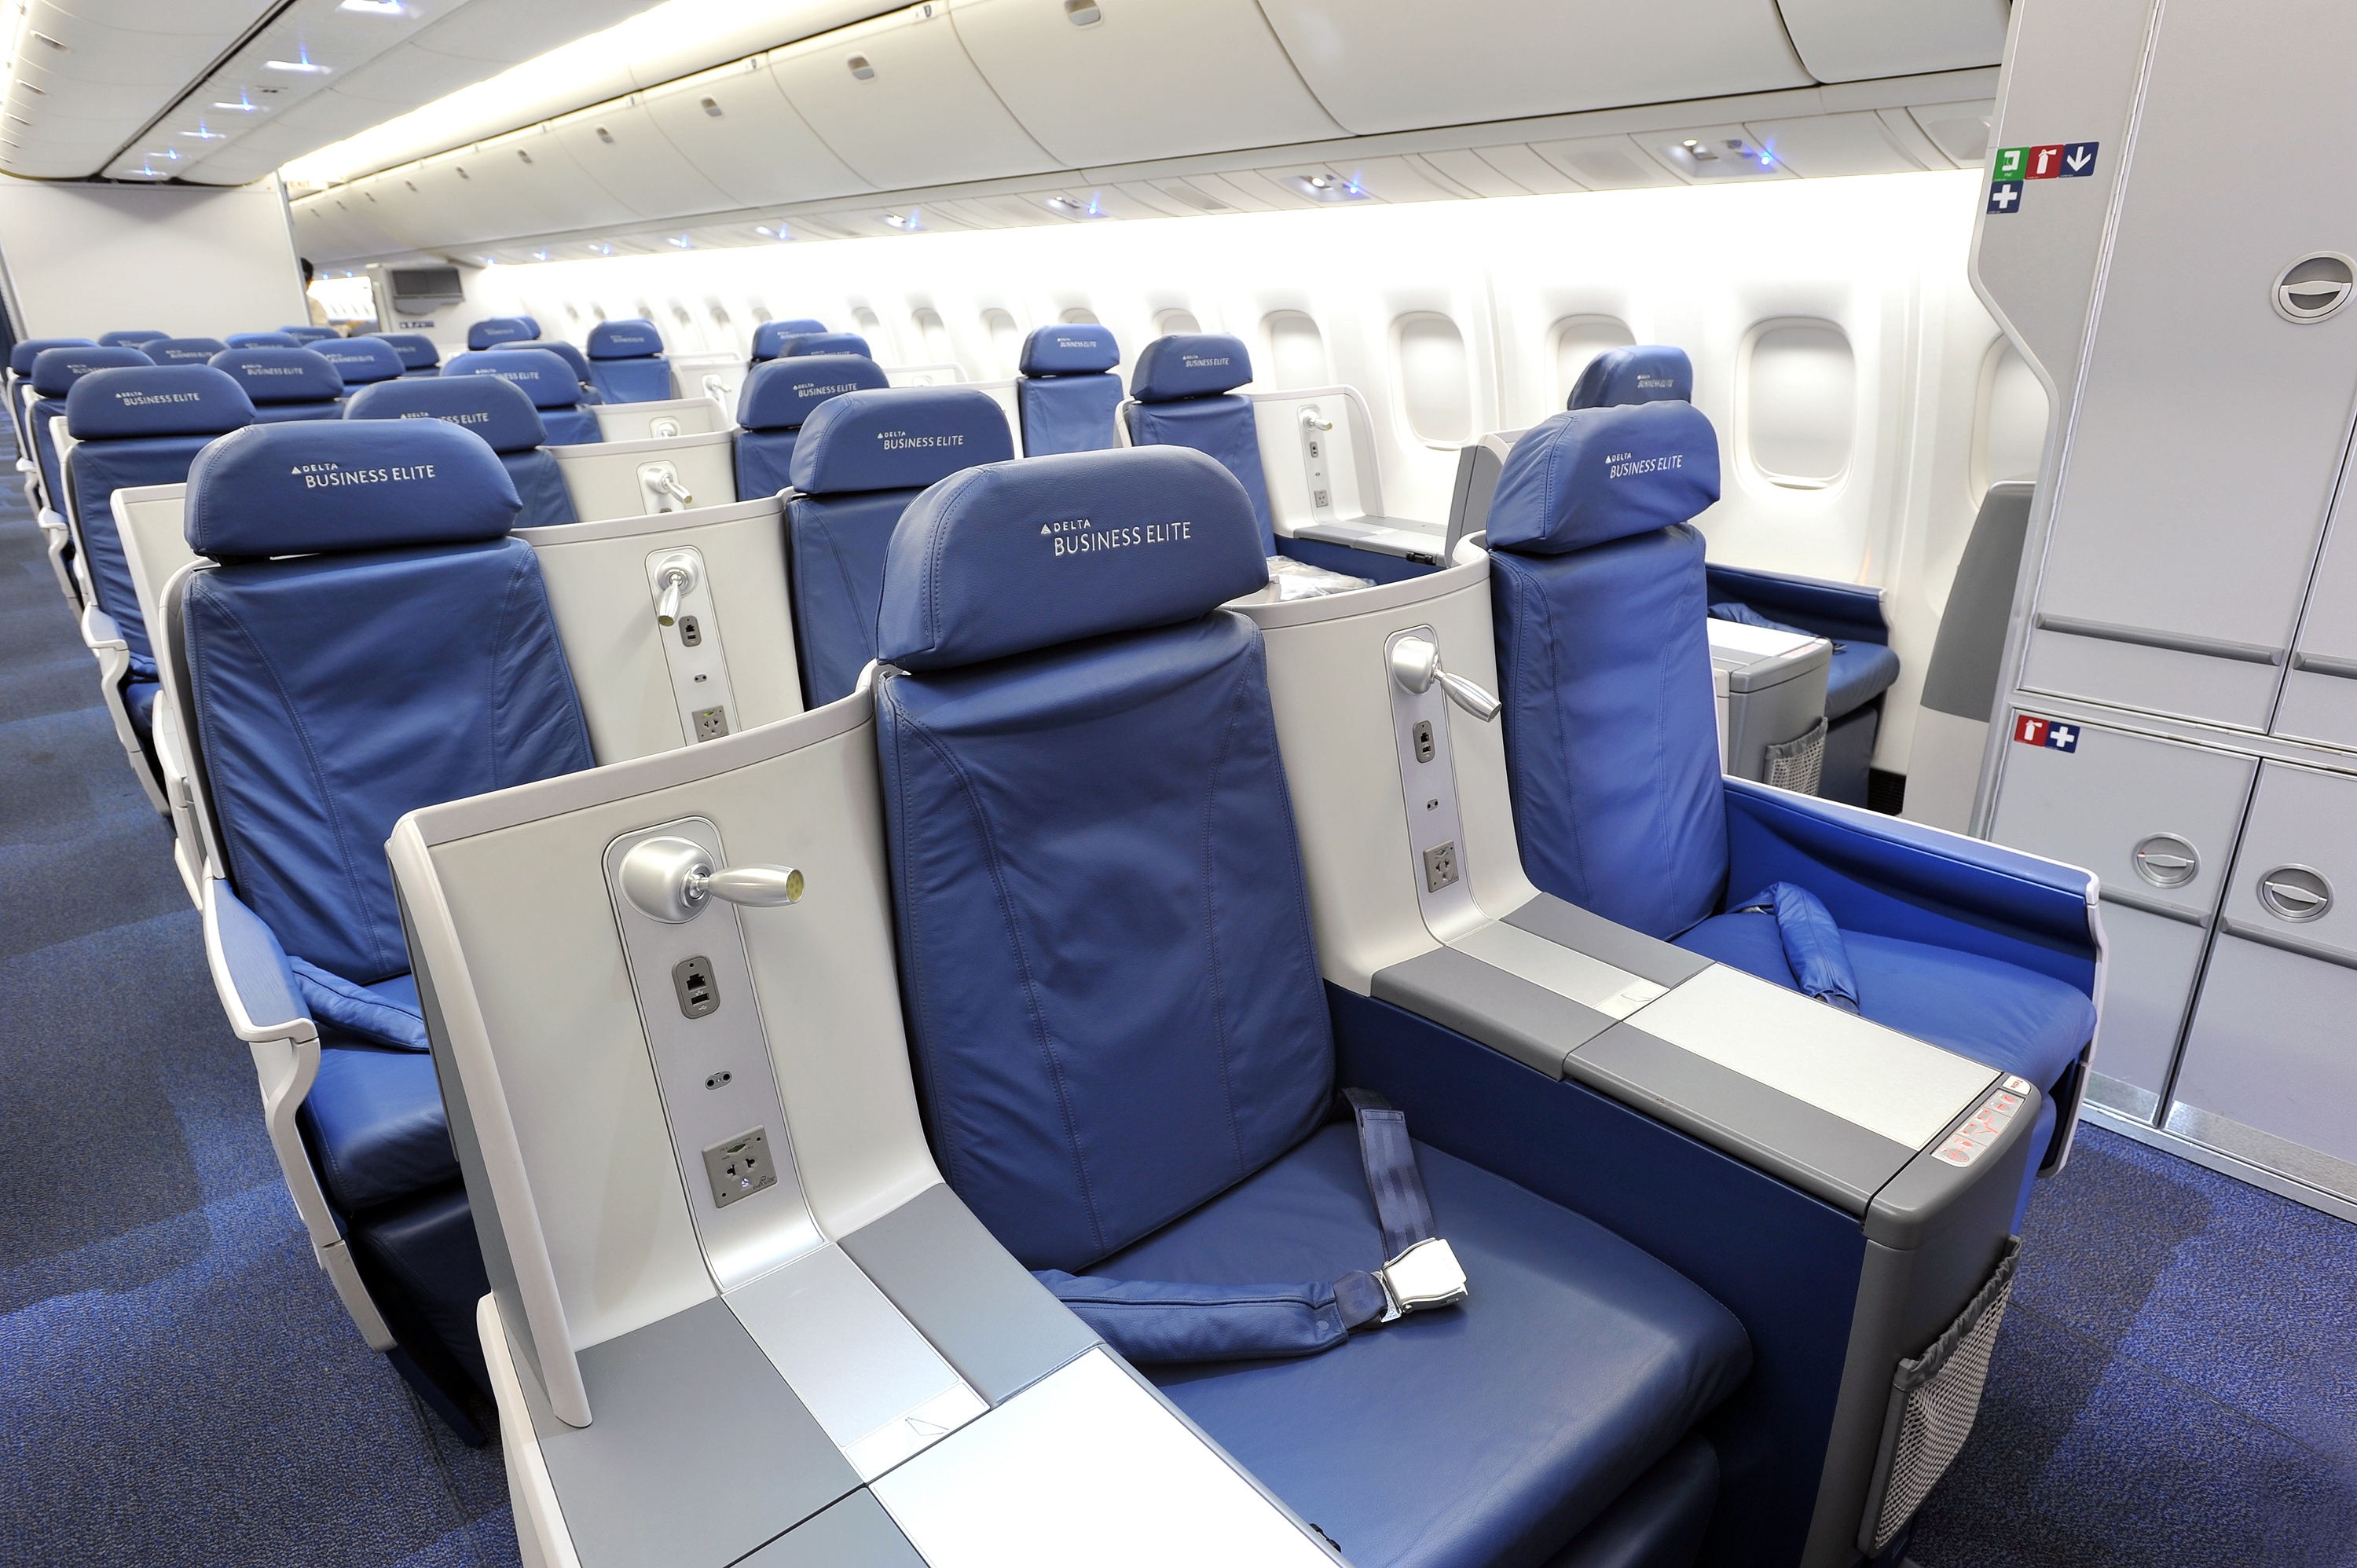 Delta Launches Aggressive First Class Up-Sell Program - Points Miles